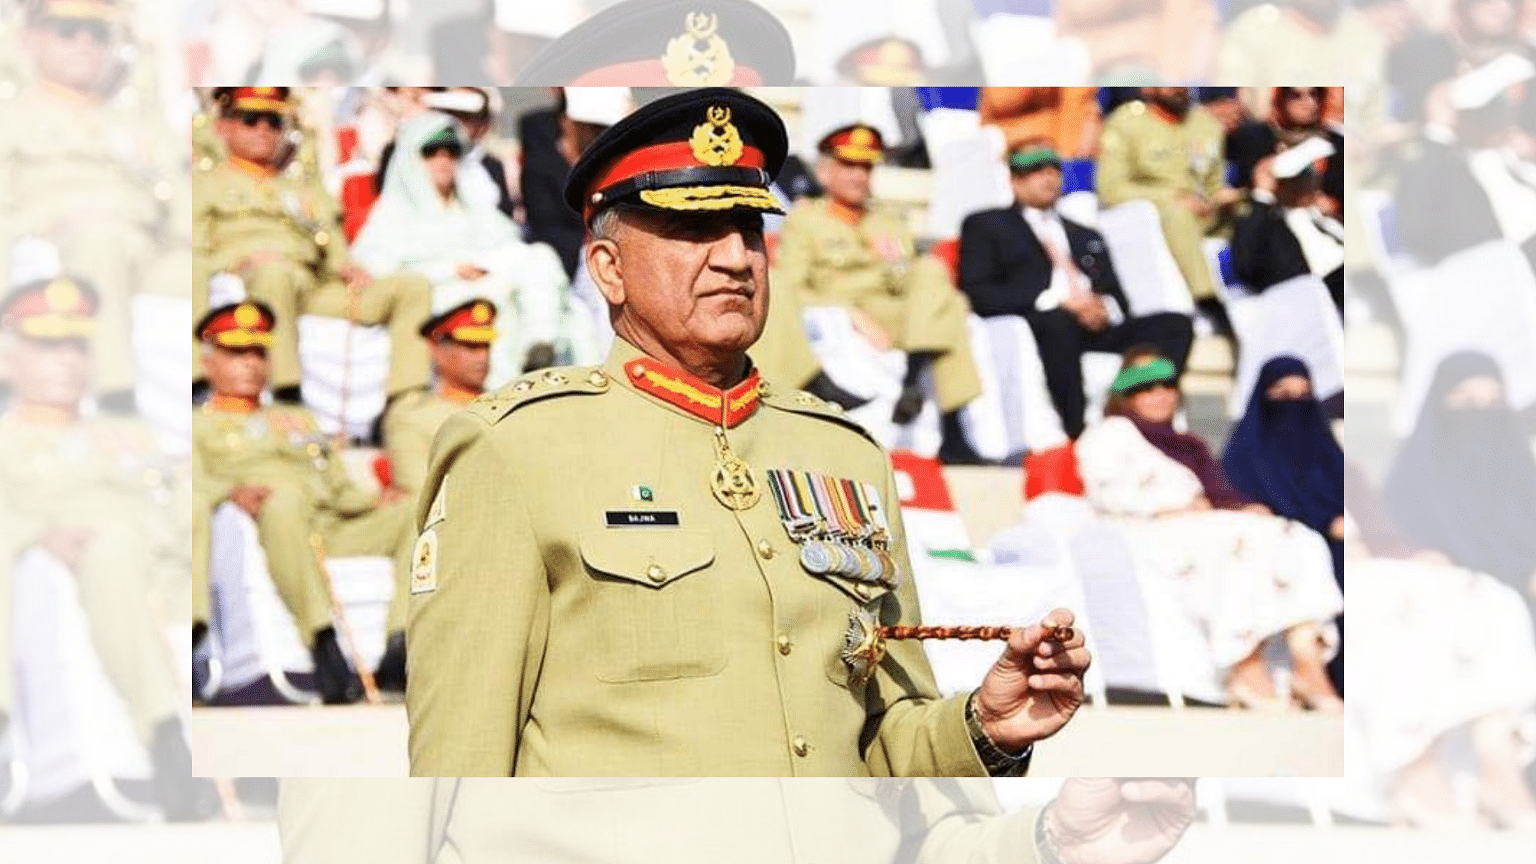 Pakistan Army Chief General Qamar Javed Bajwa’s tenure has been extended for three more years.